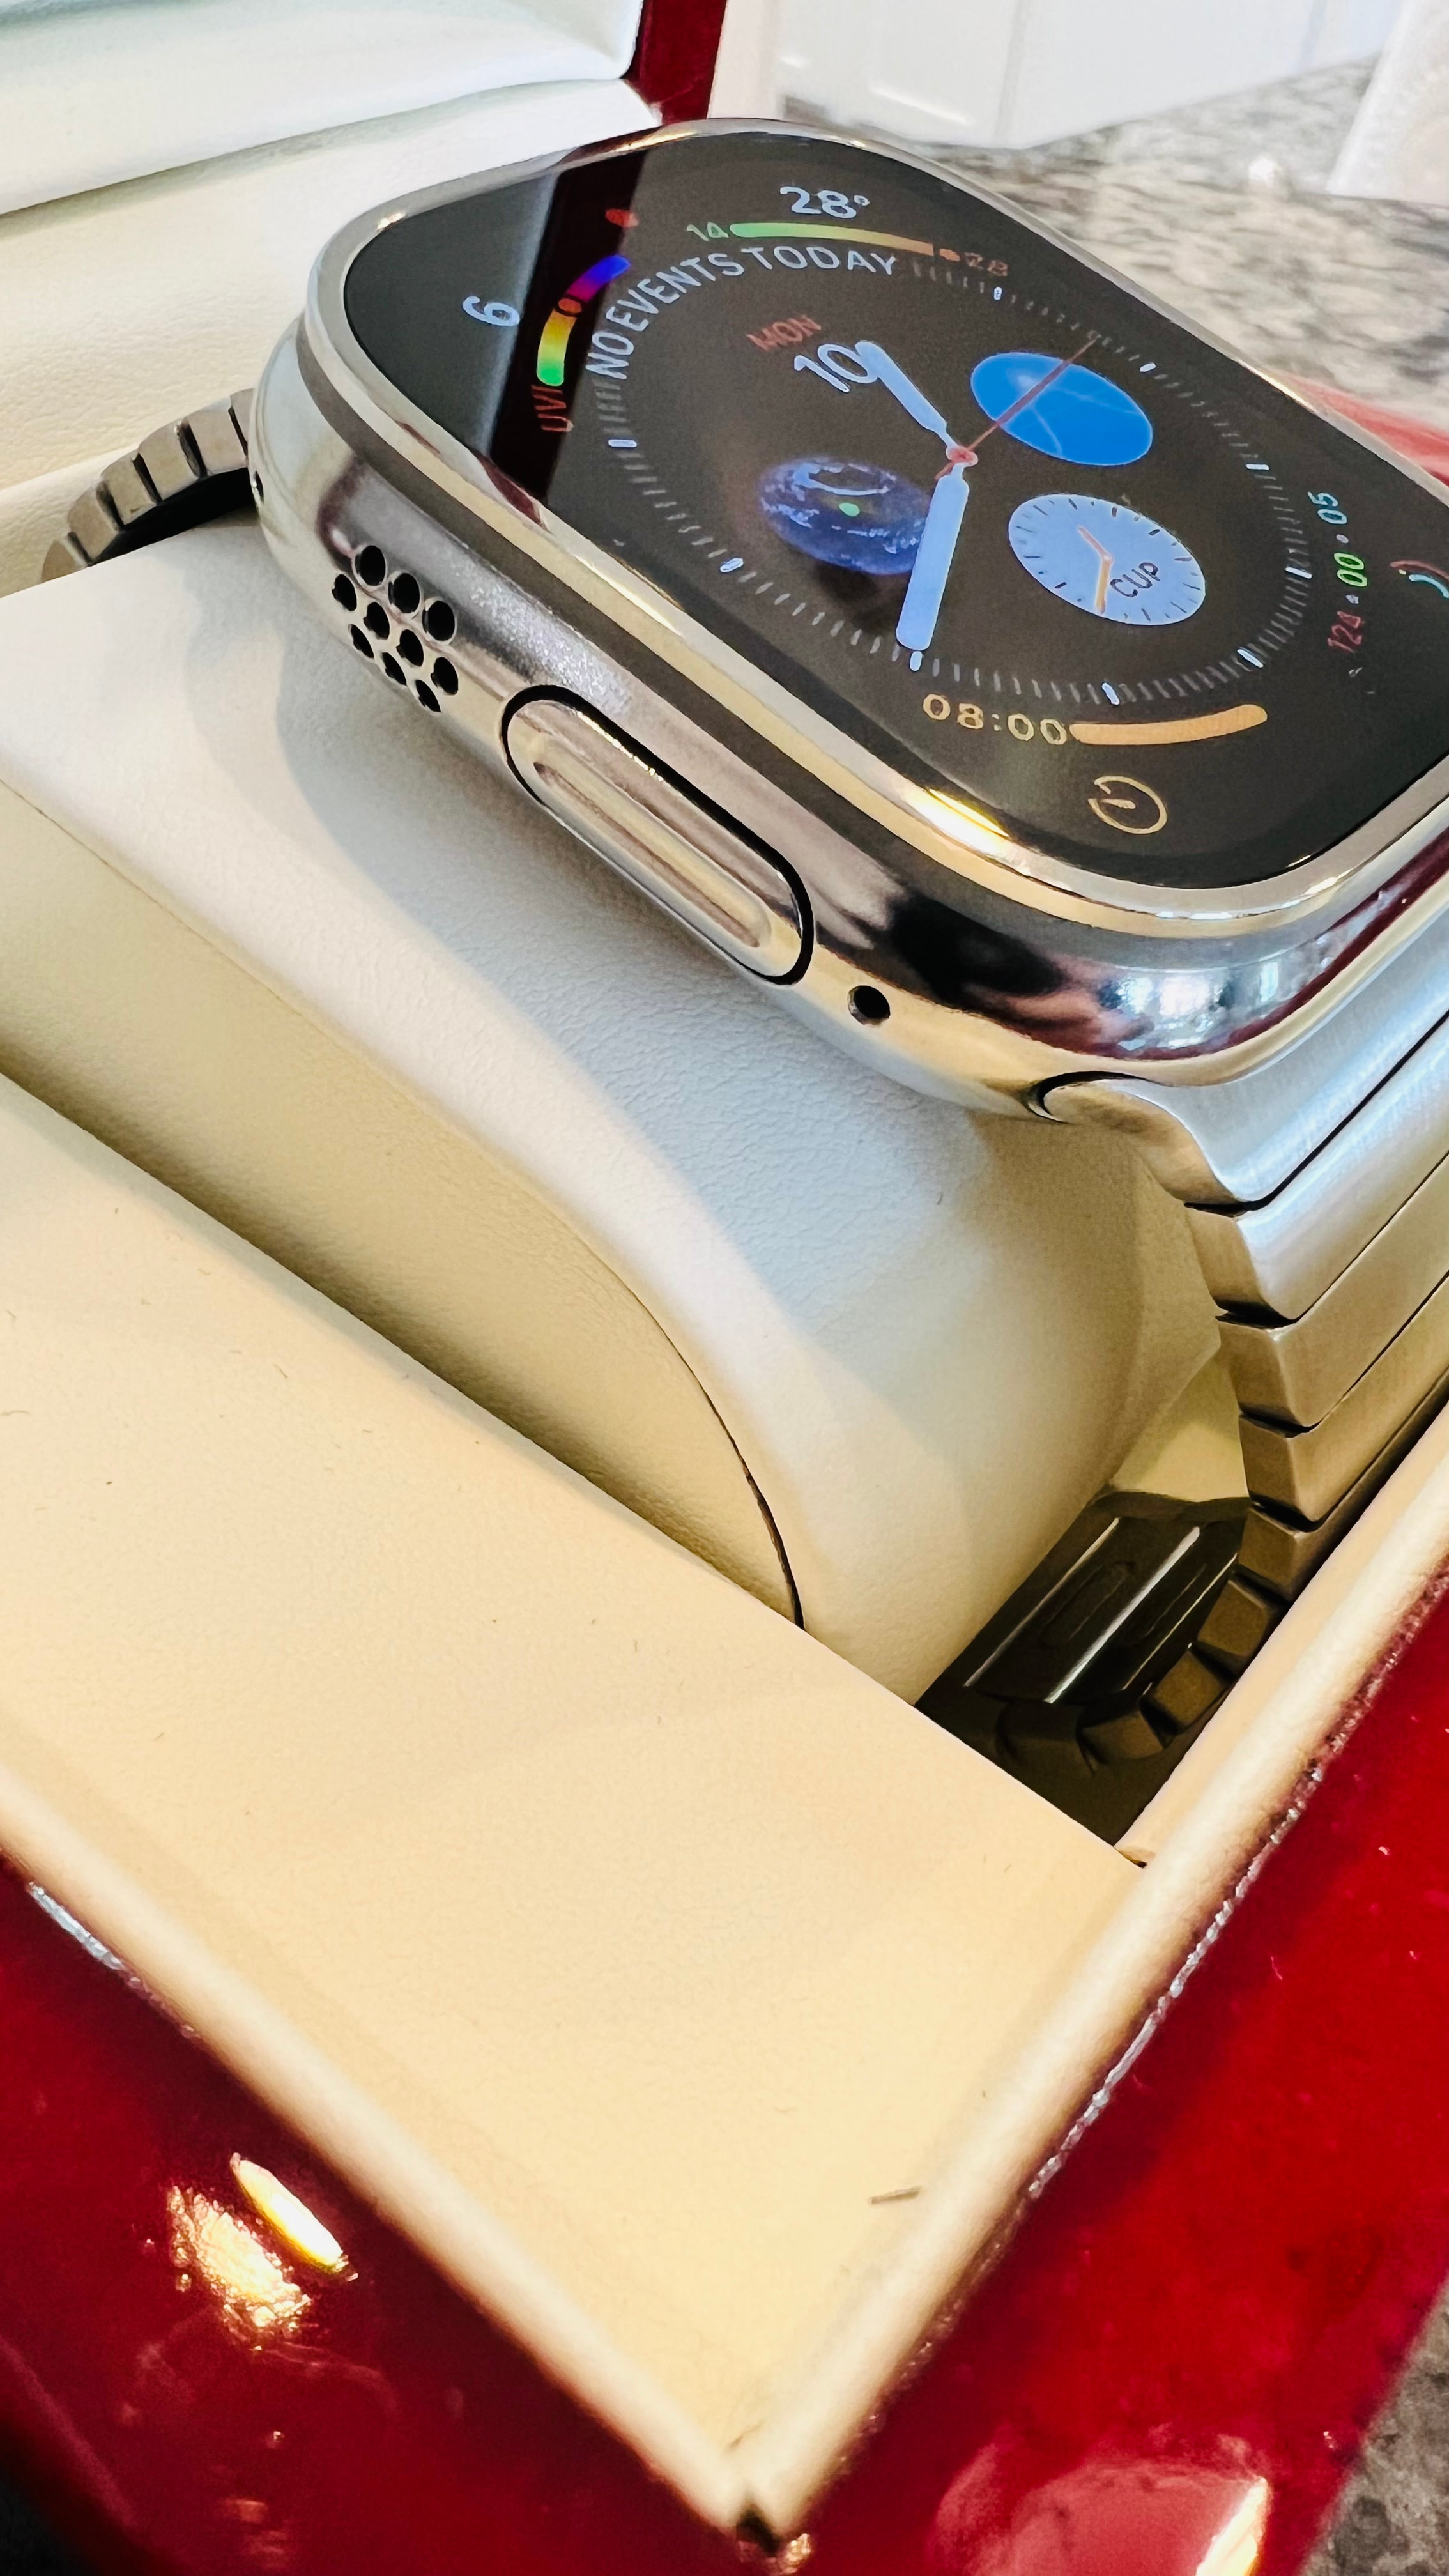 Before and after: Polishing the Apple Watch - CNET